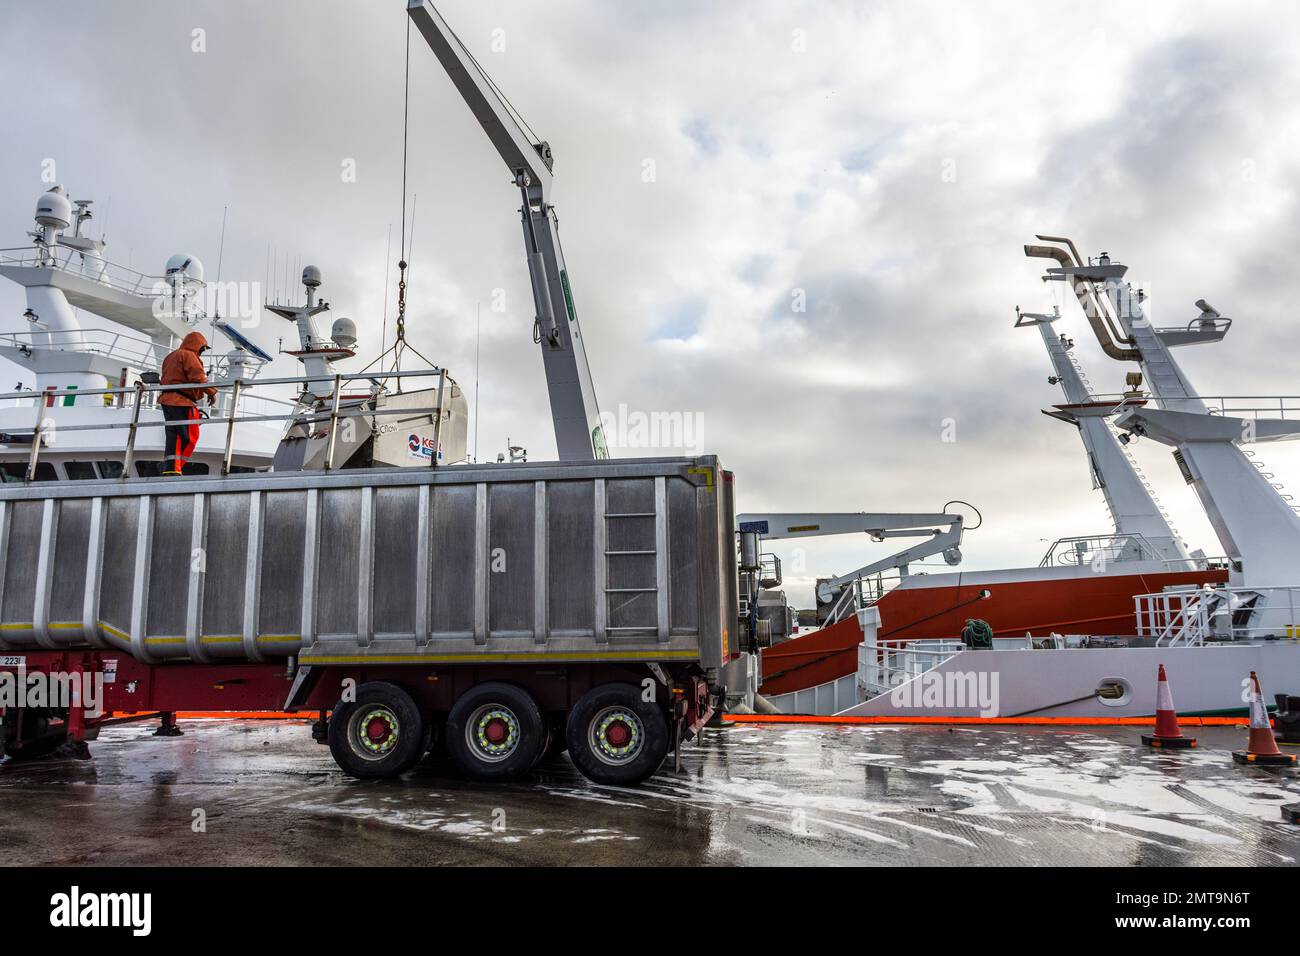 Unloading fish from ANTARCTIC super trawler in Killybegs, County Donegal, Ireland. Stock Photo